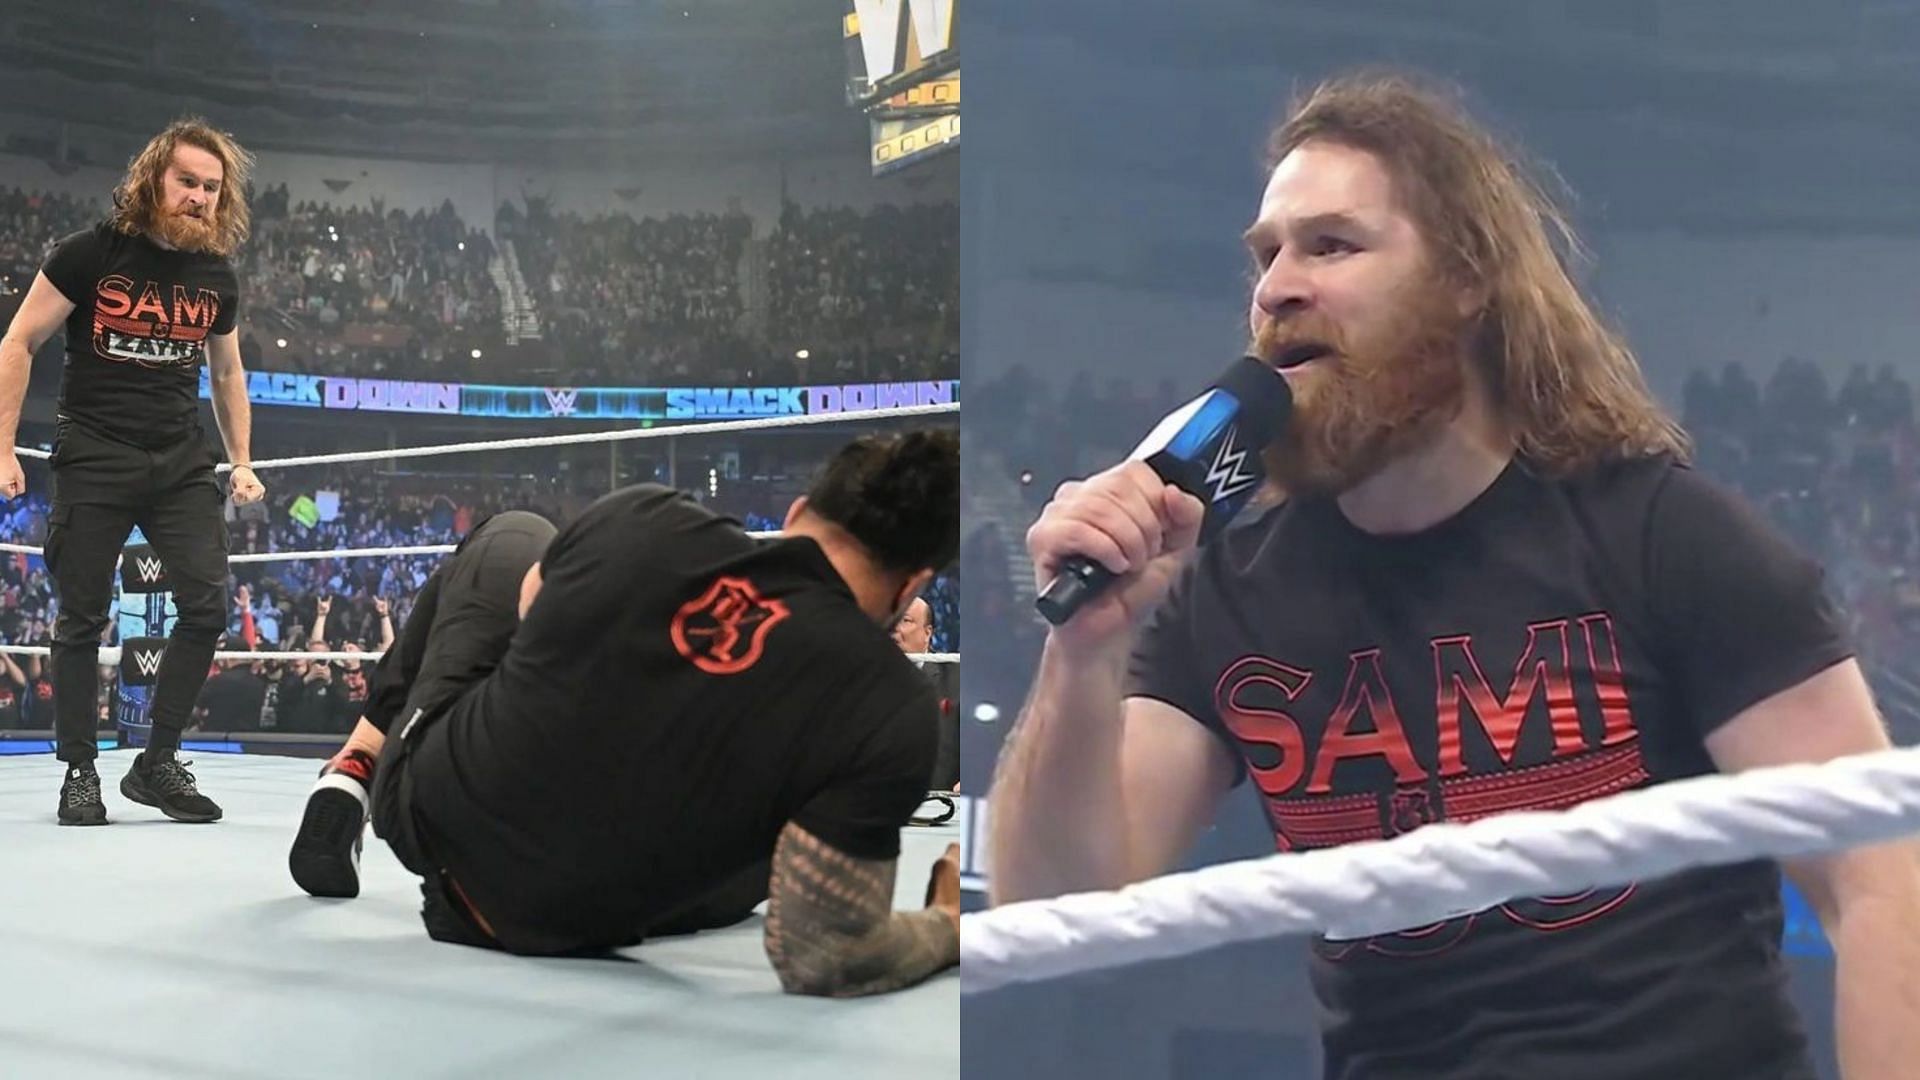 Sami Zayn will face Roman Reigns at WWE Elimination Chamber